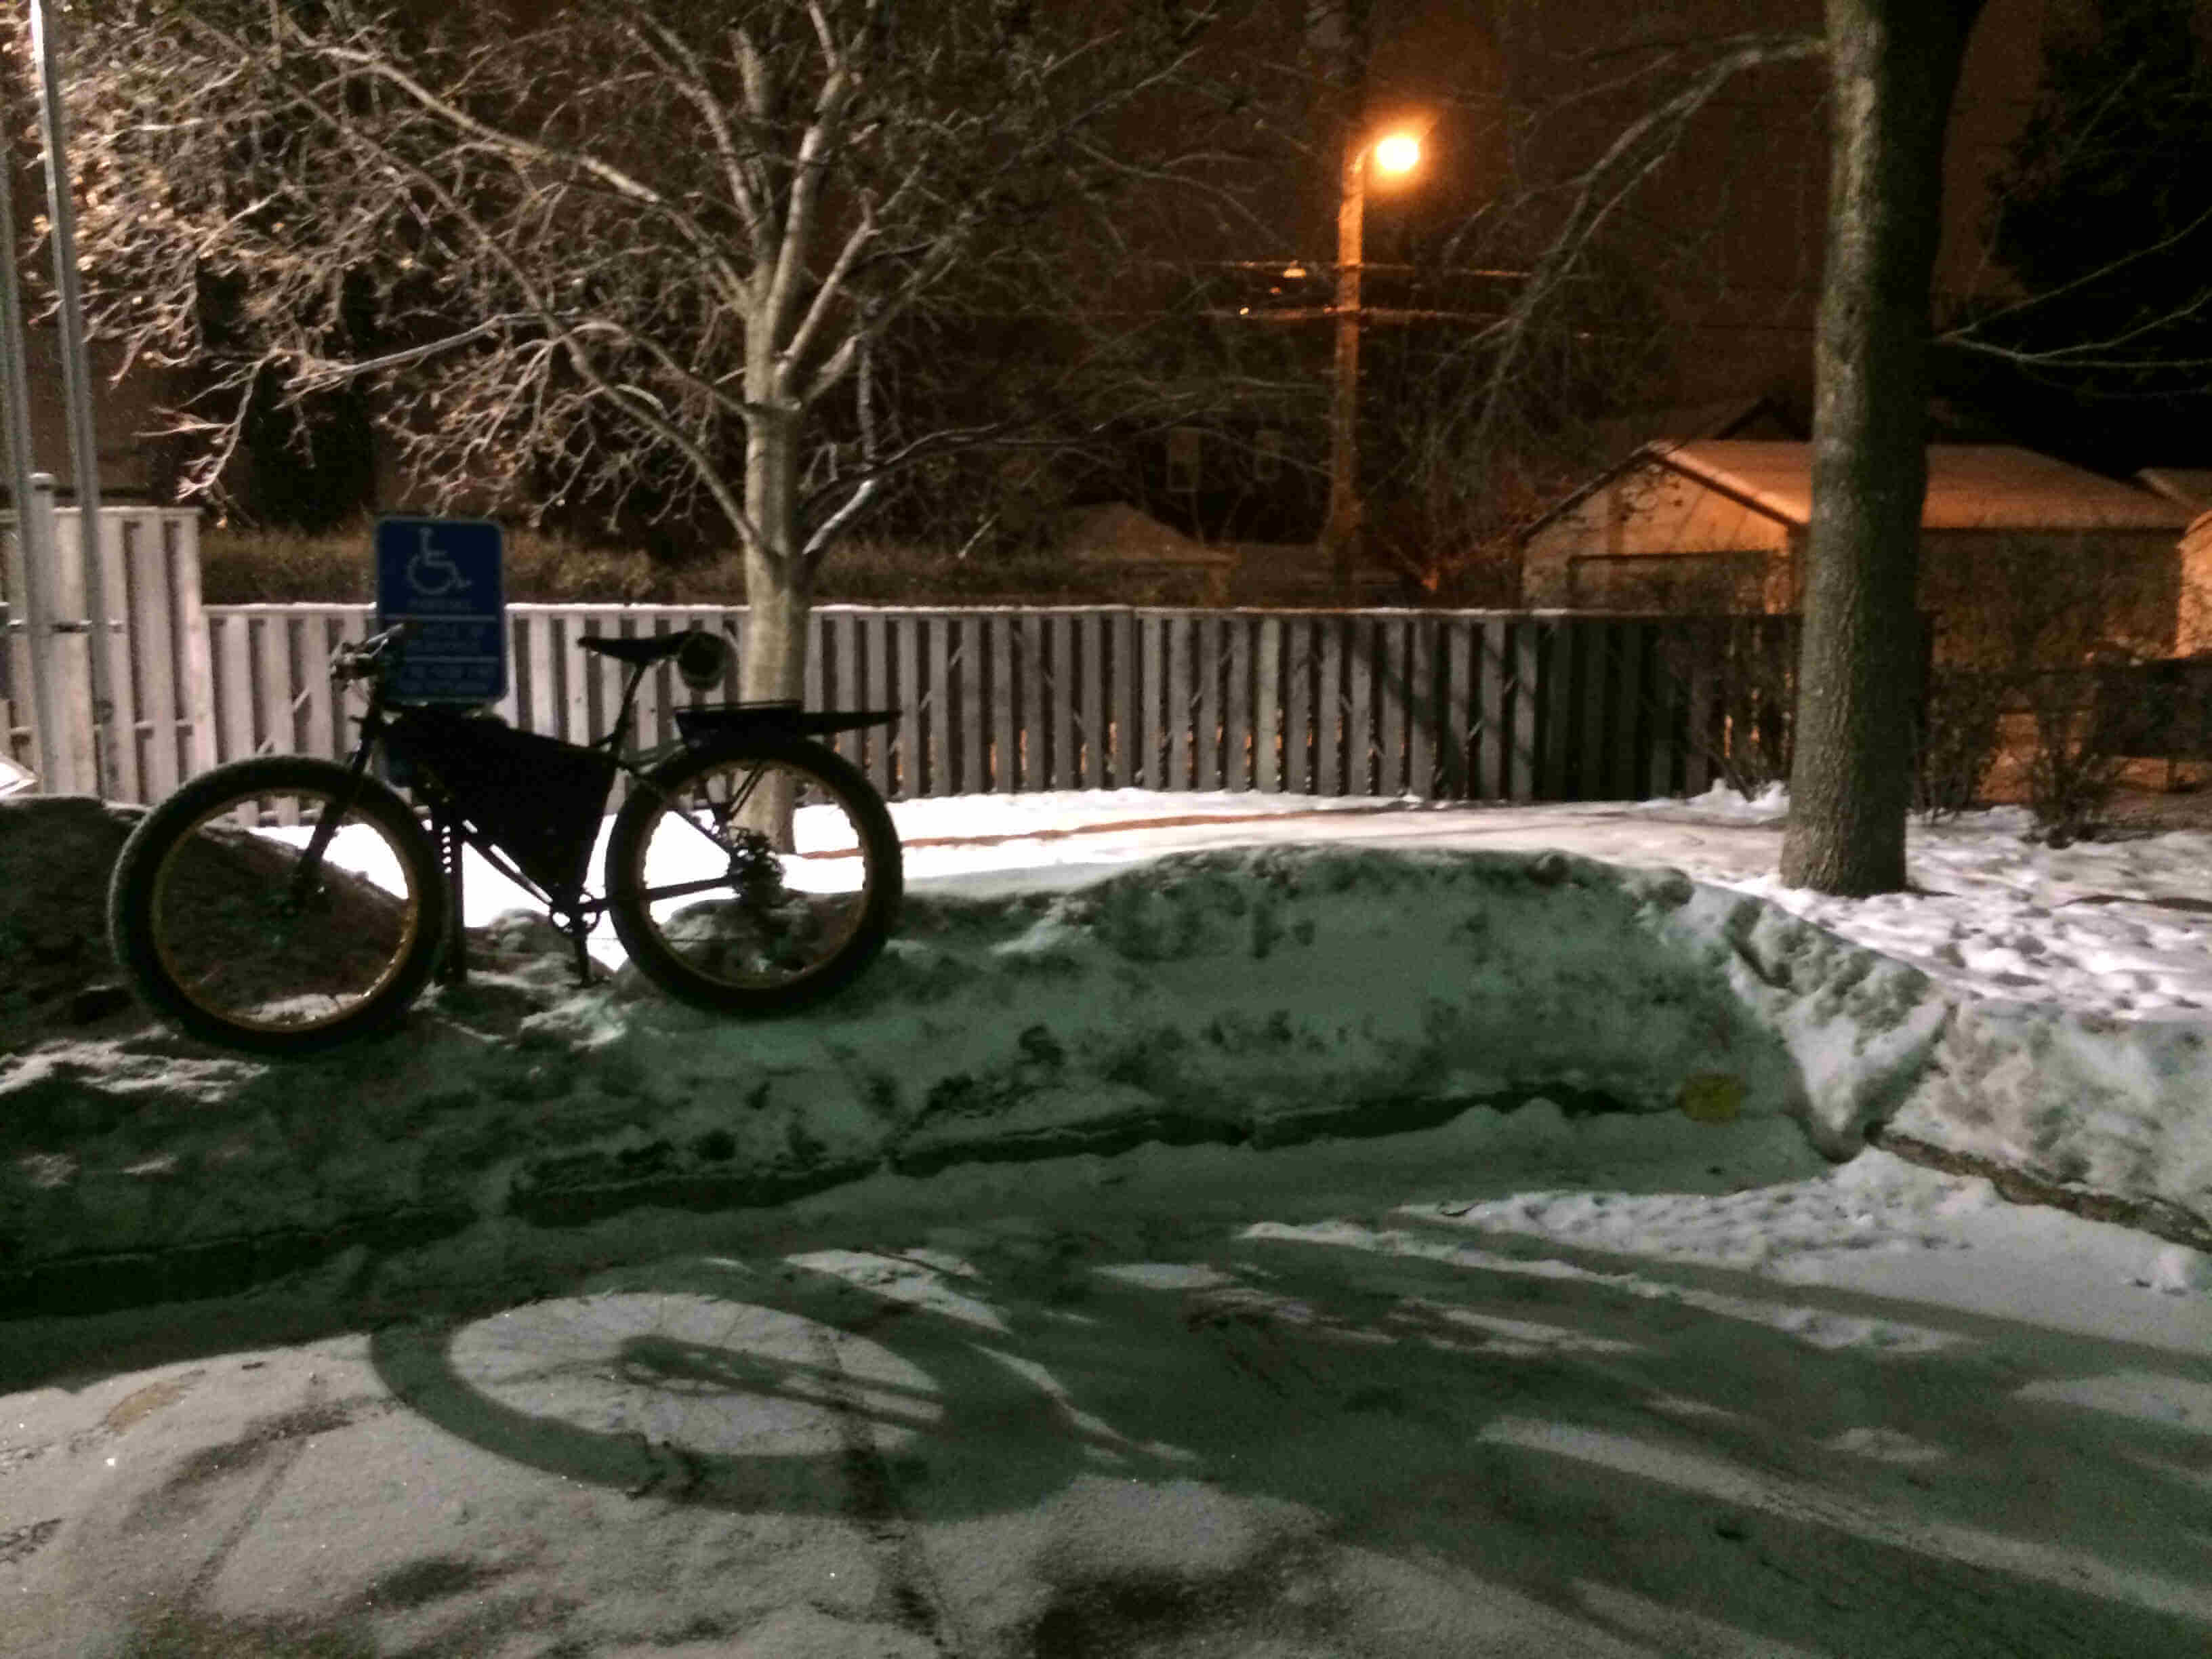 Left side view of a Surly Pugsley fat bike, standing on a snowbank, against a handicap parking sign at night